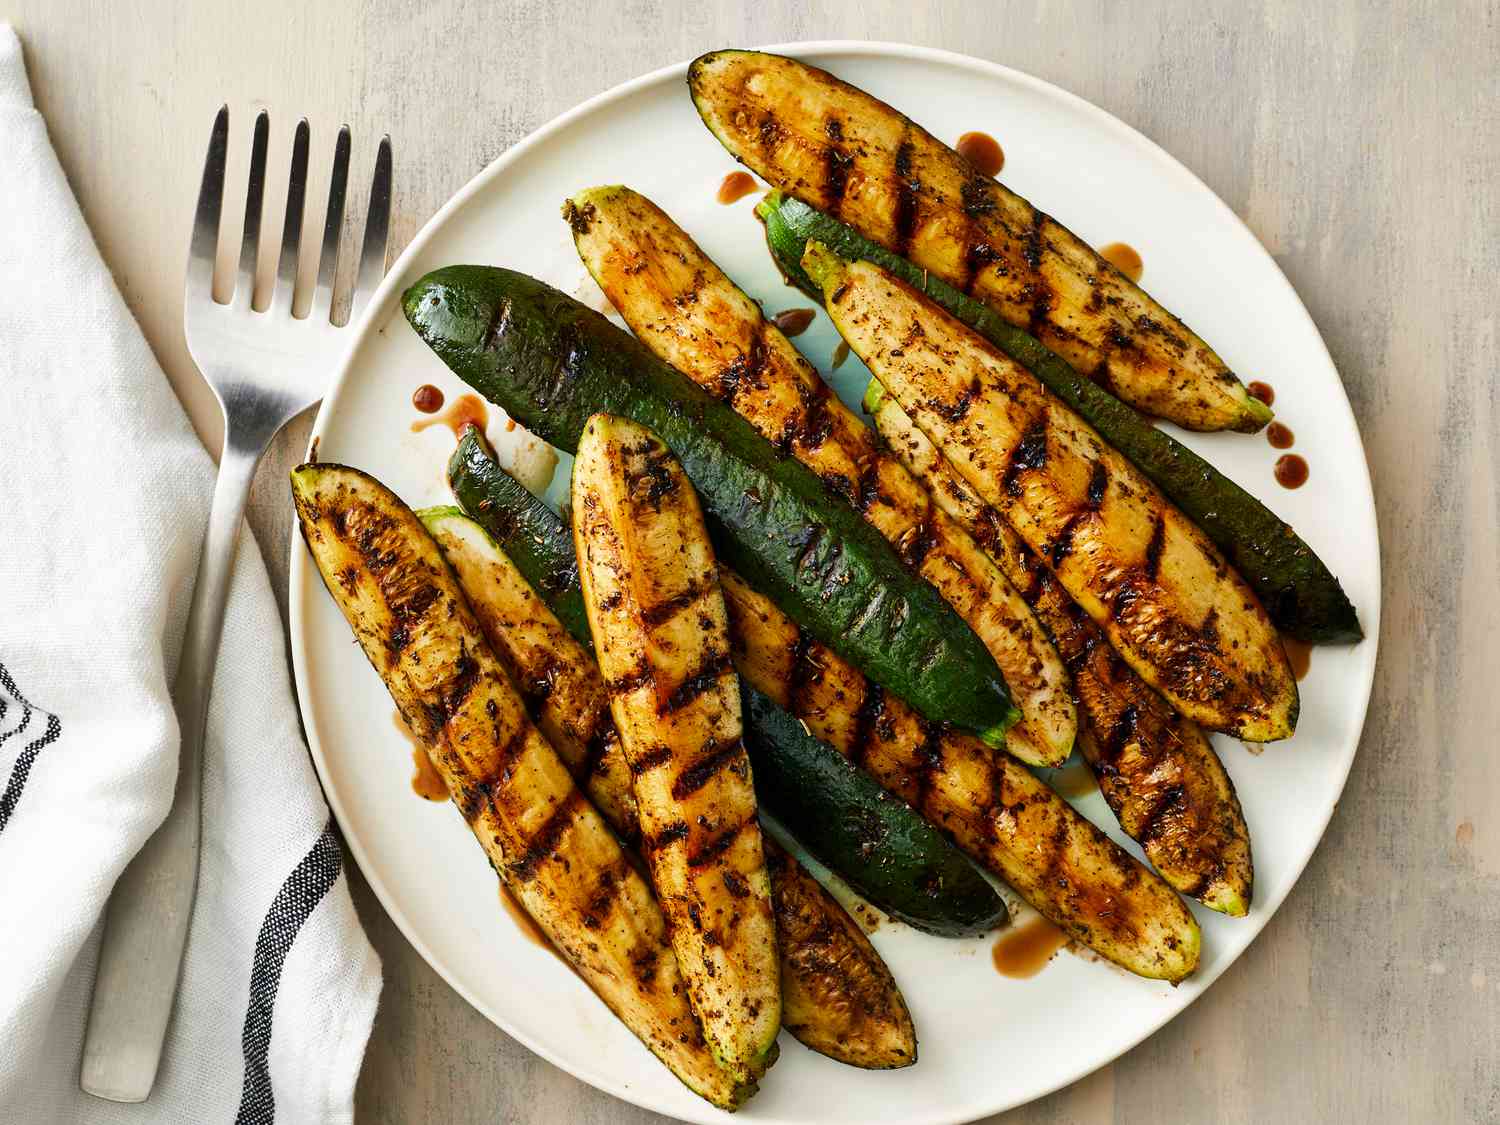 how-to-cook-zucchini-so-its-not-mushy